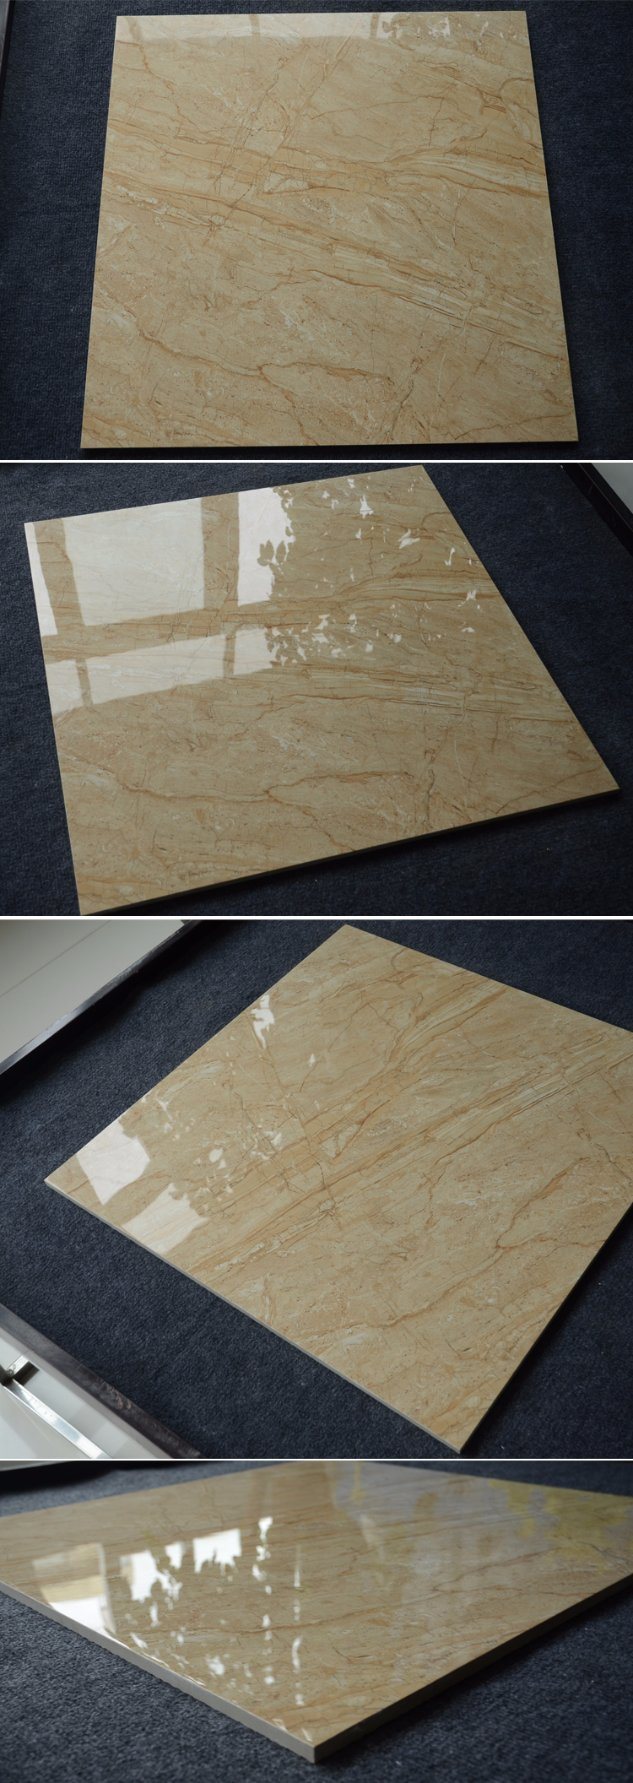 600X600 High Quality Wall Monolayer Yellow Marble Tile